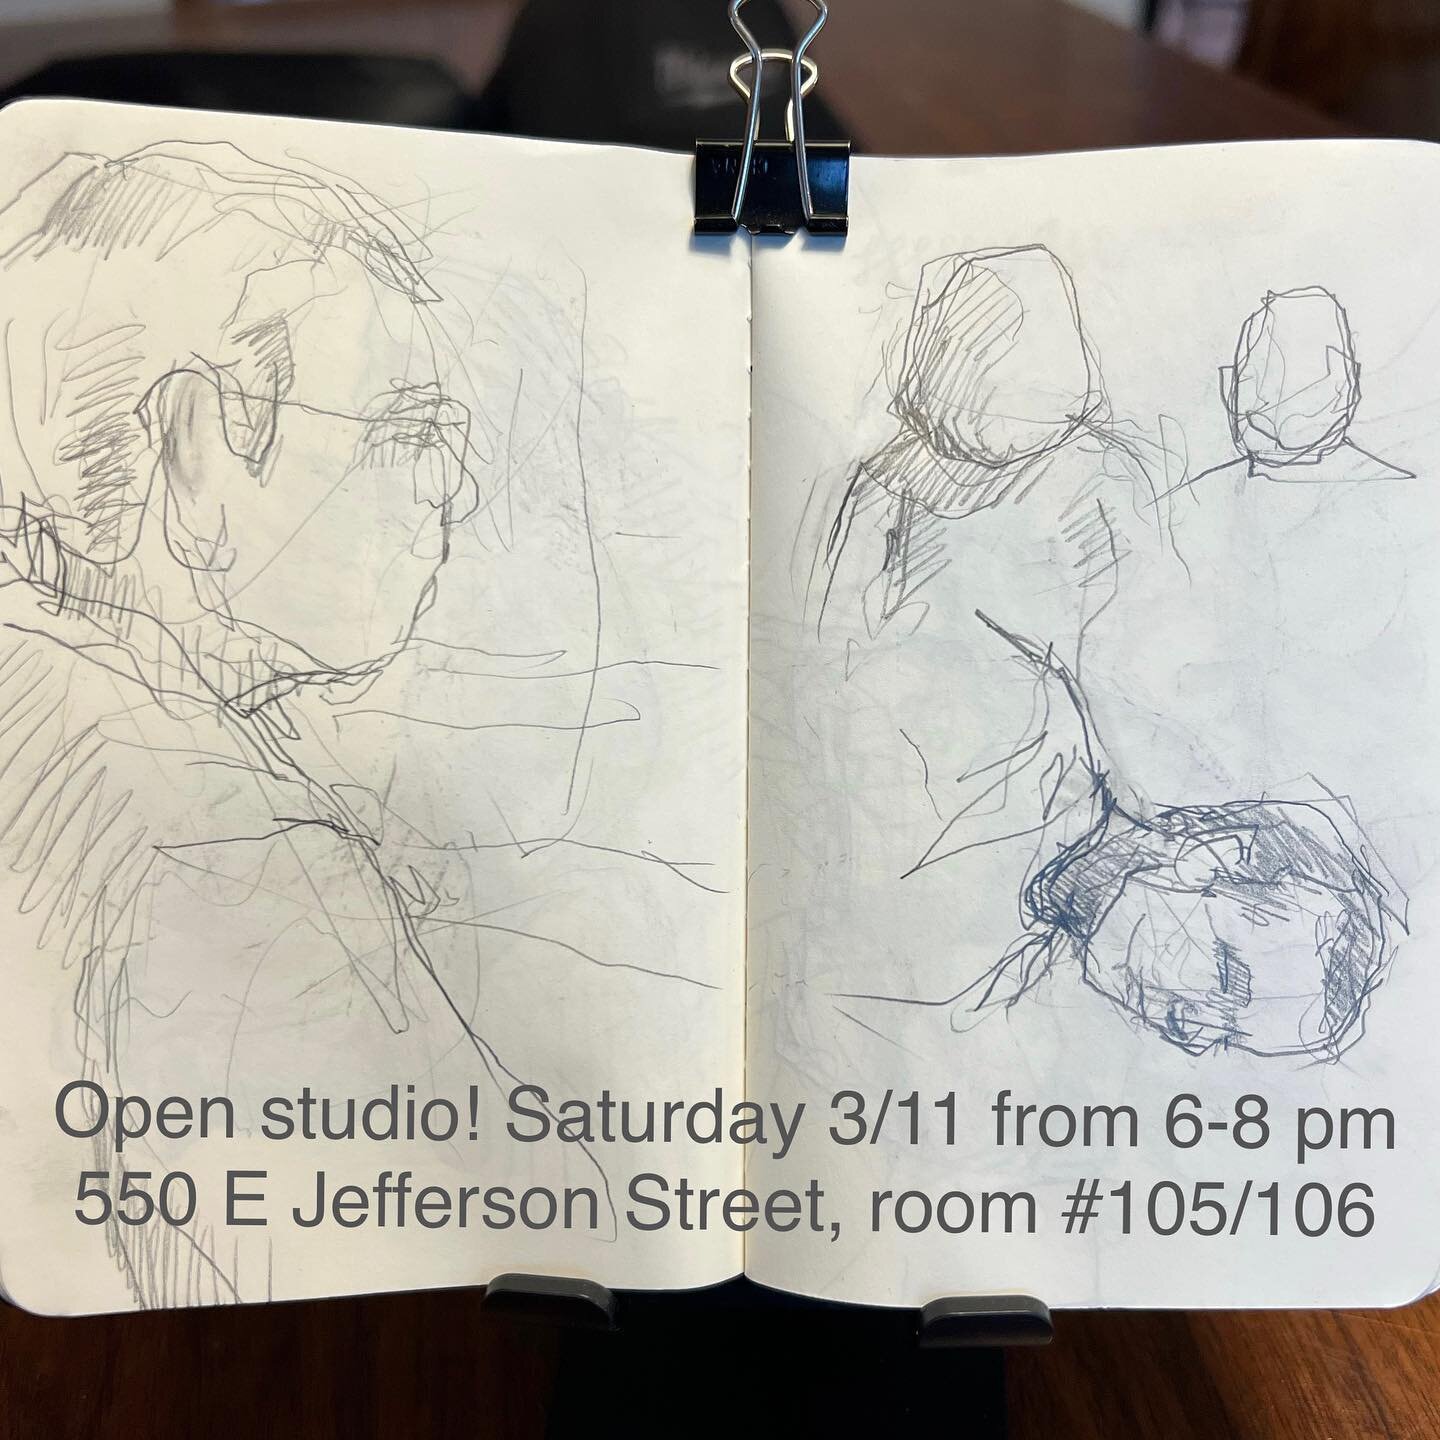 2nd Saturday Open studio this Saturday, 3/11 from 6-8 pm, 
550 E Jefferson Street in Franklin, room 105/106. 
See my tiny drawings, discounts on paintings over 3 years old. 🖤✨
.
#art #artwork #artist #artistsoninstagram #studioartist #draw #drawing 